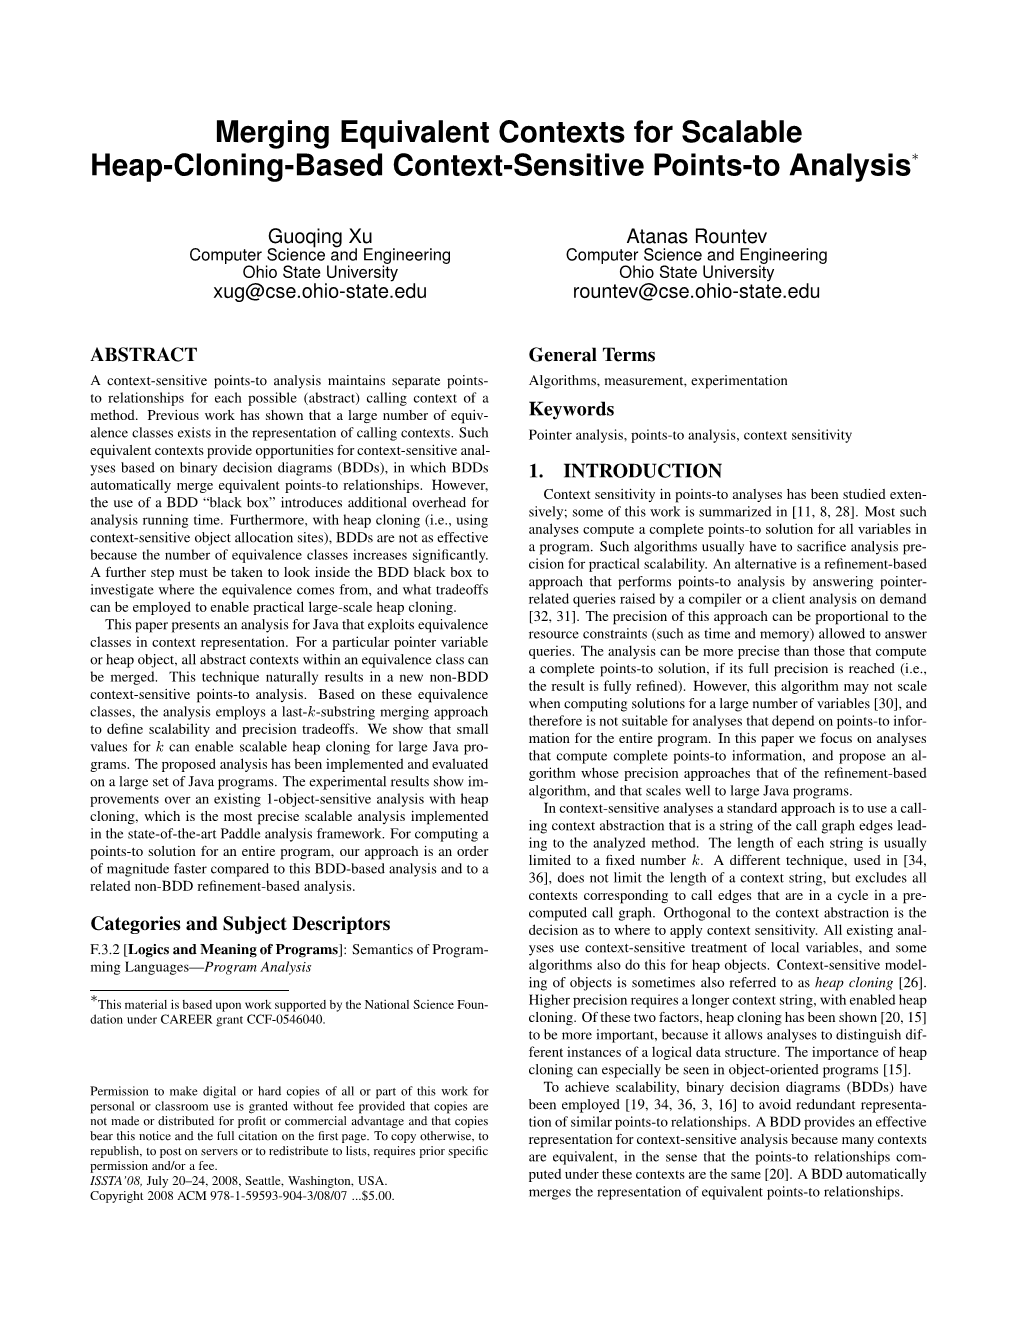 Merging Equivalent Contexts for Scalable Heap-Cloning-Based Context-Sensitive Points-To Analysis∗